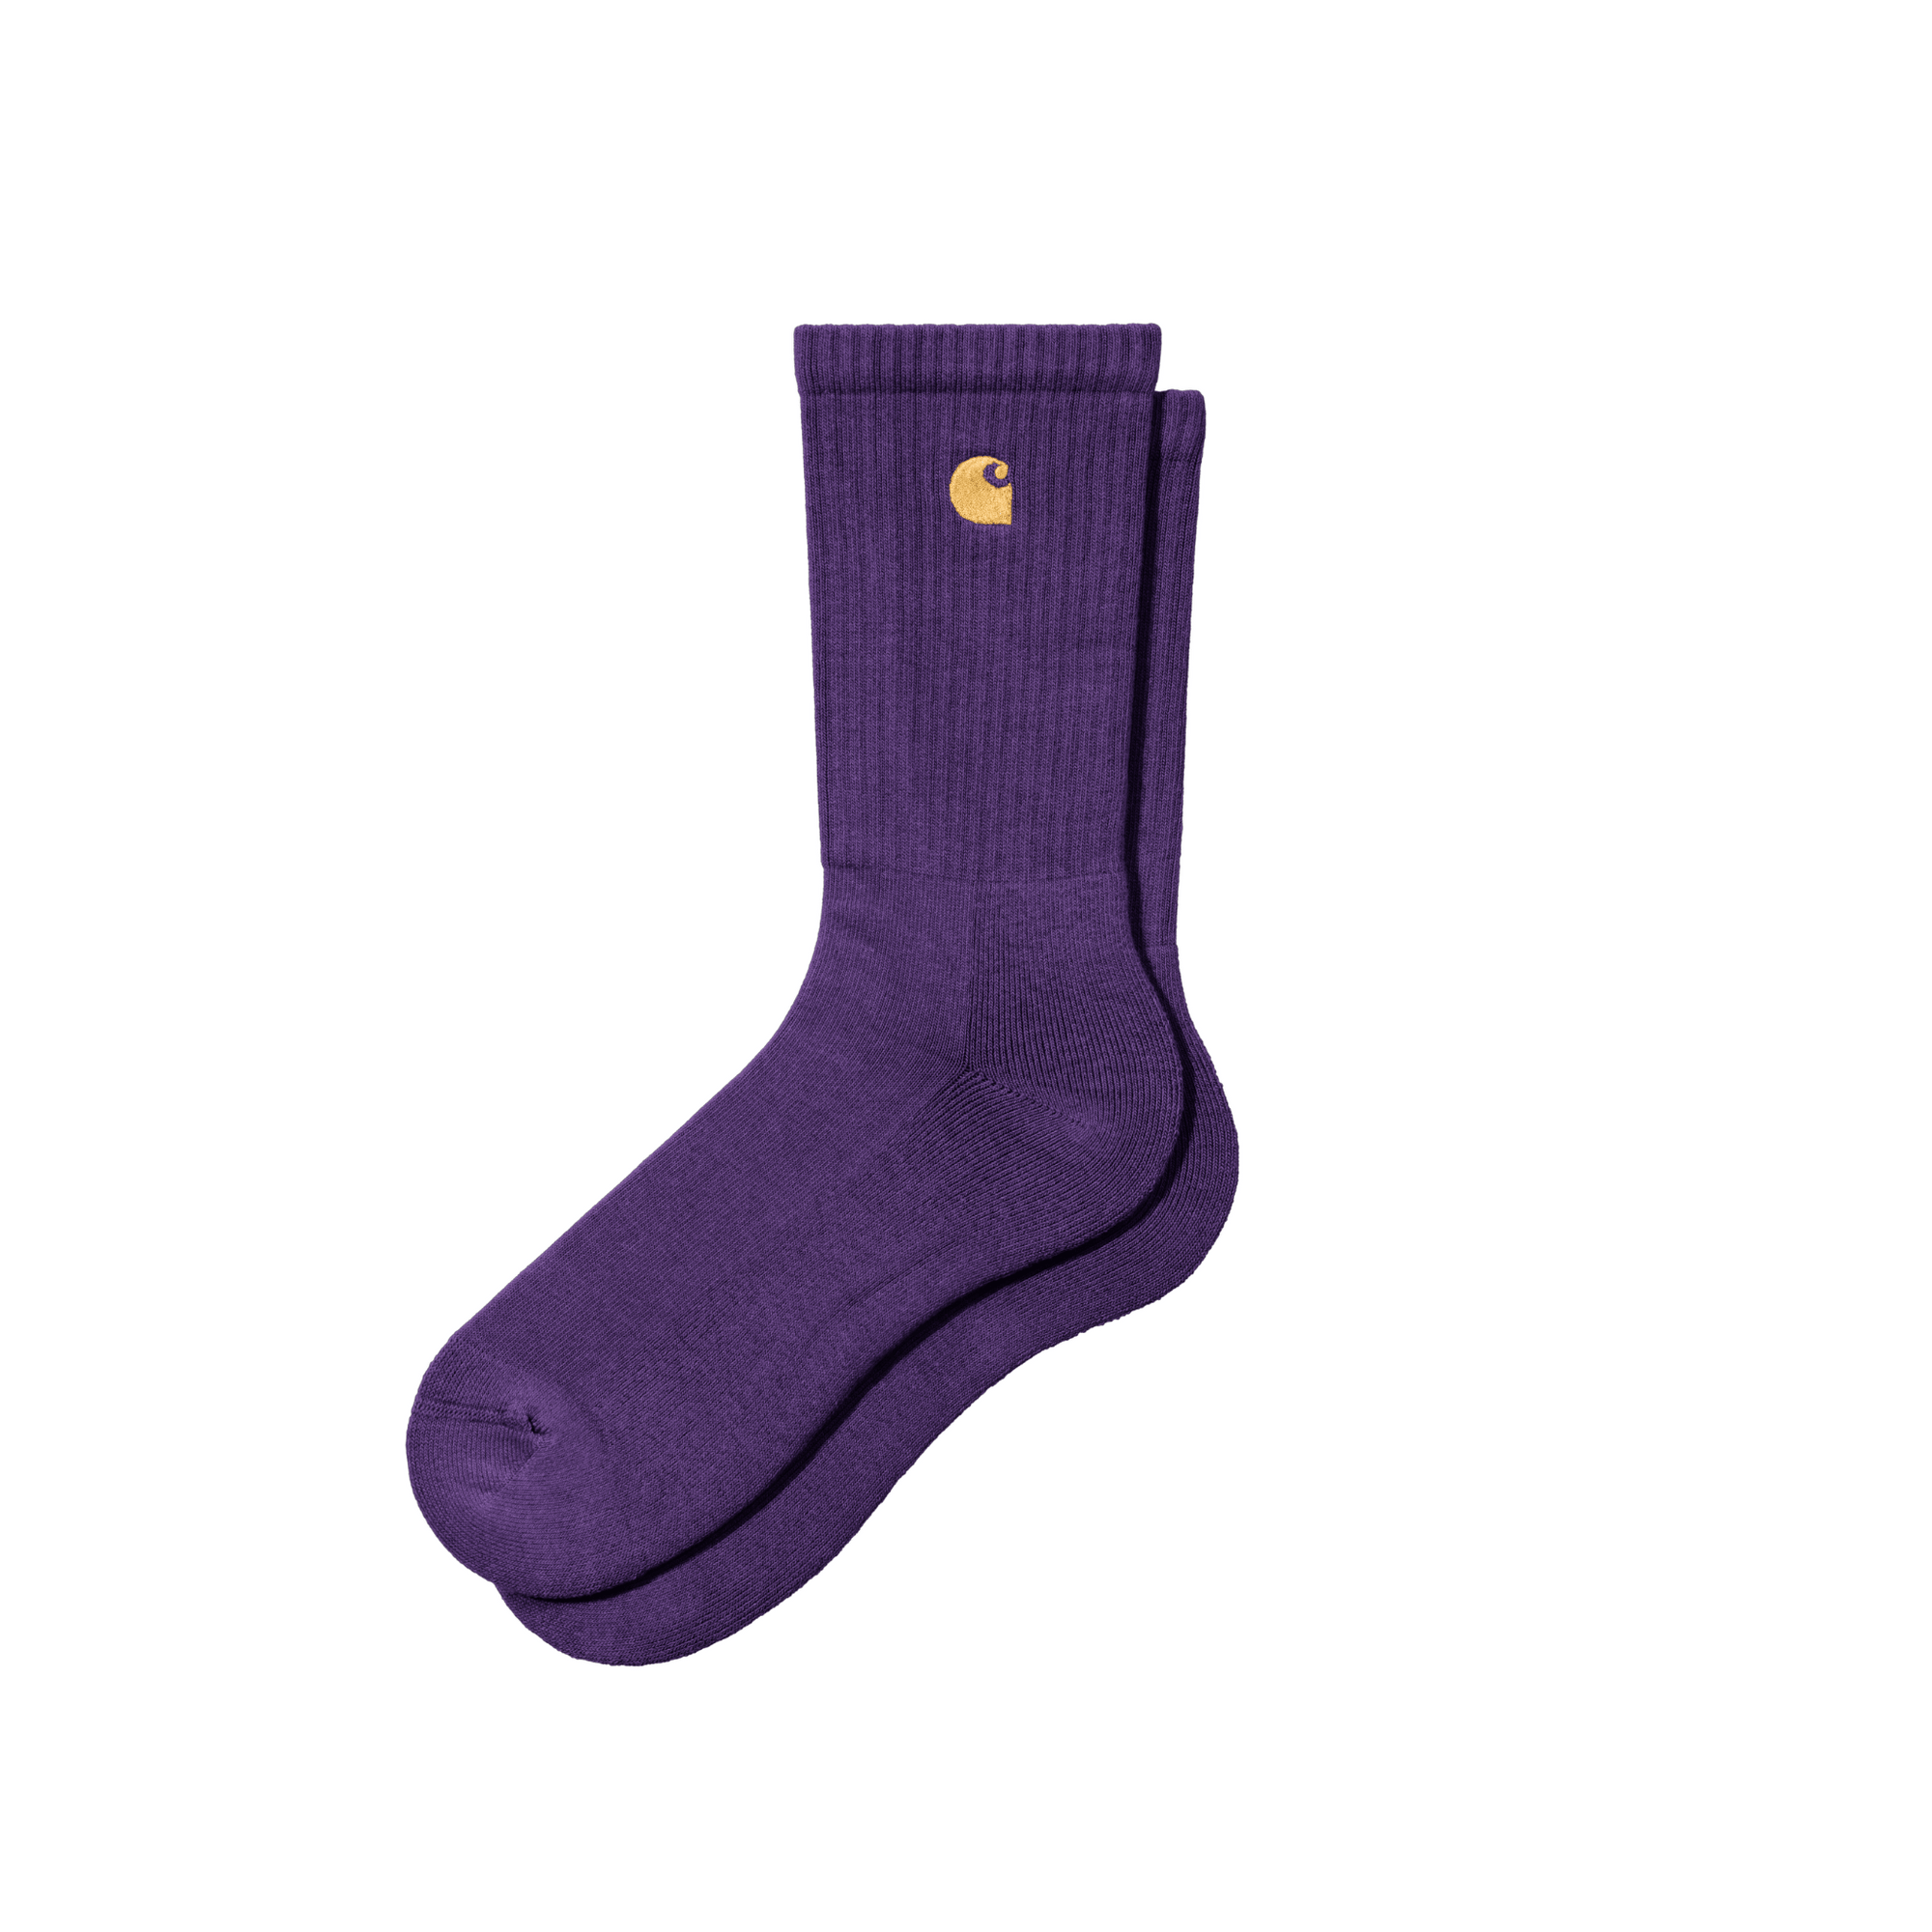 Carhartt WIP Chase Socks (tyrian/gold) - Blue Mountain Store